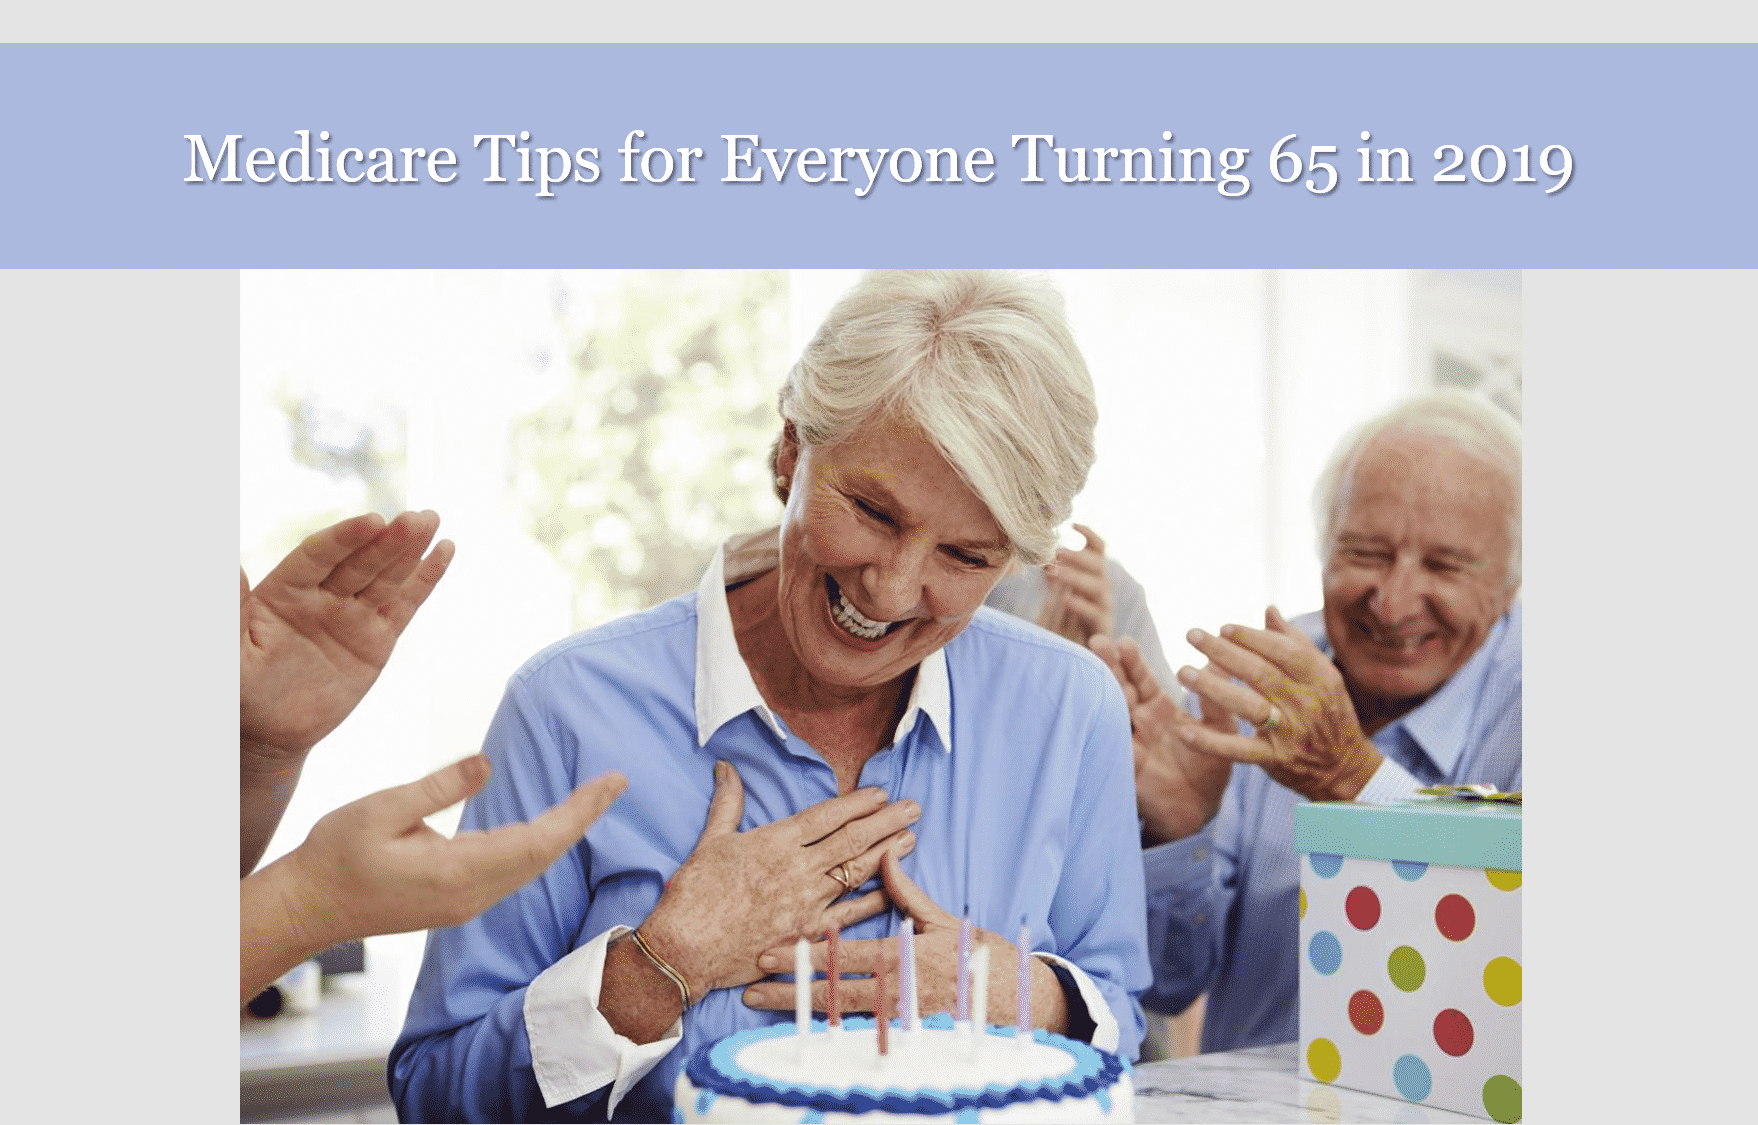 Were You Born in 1954? Medicare Tips for Everyone Turning 65 in 2019